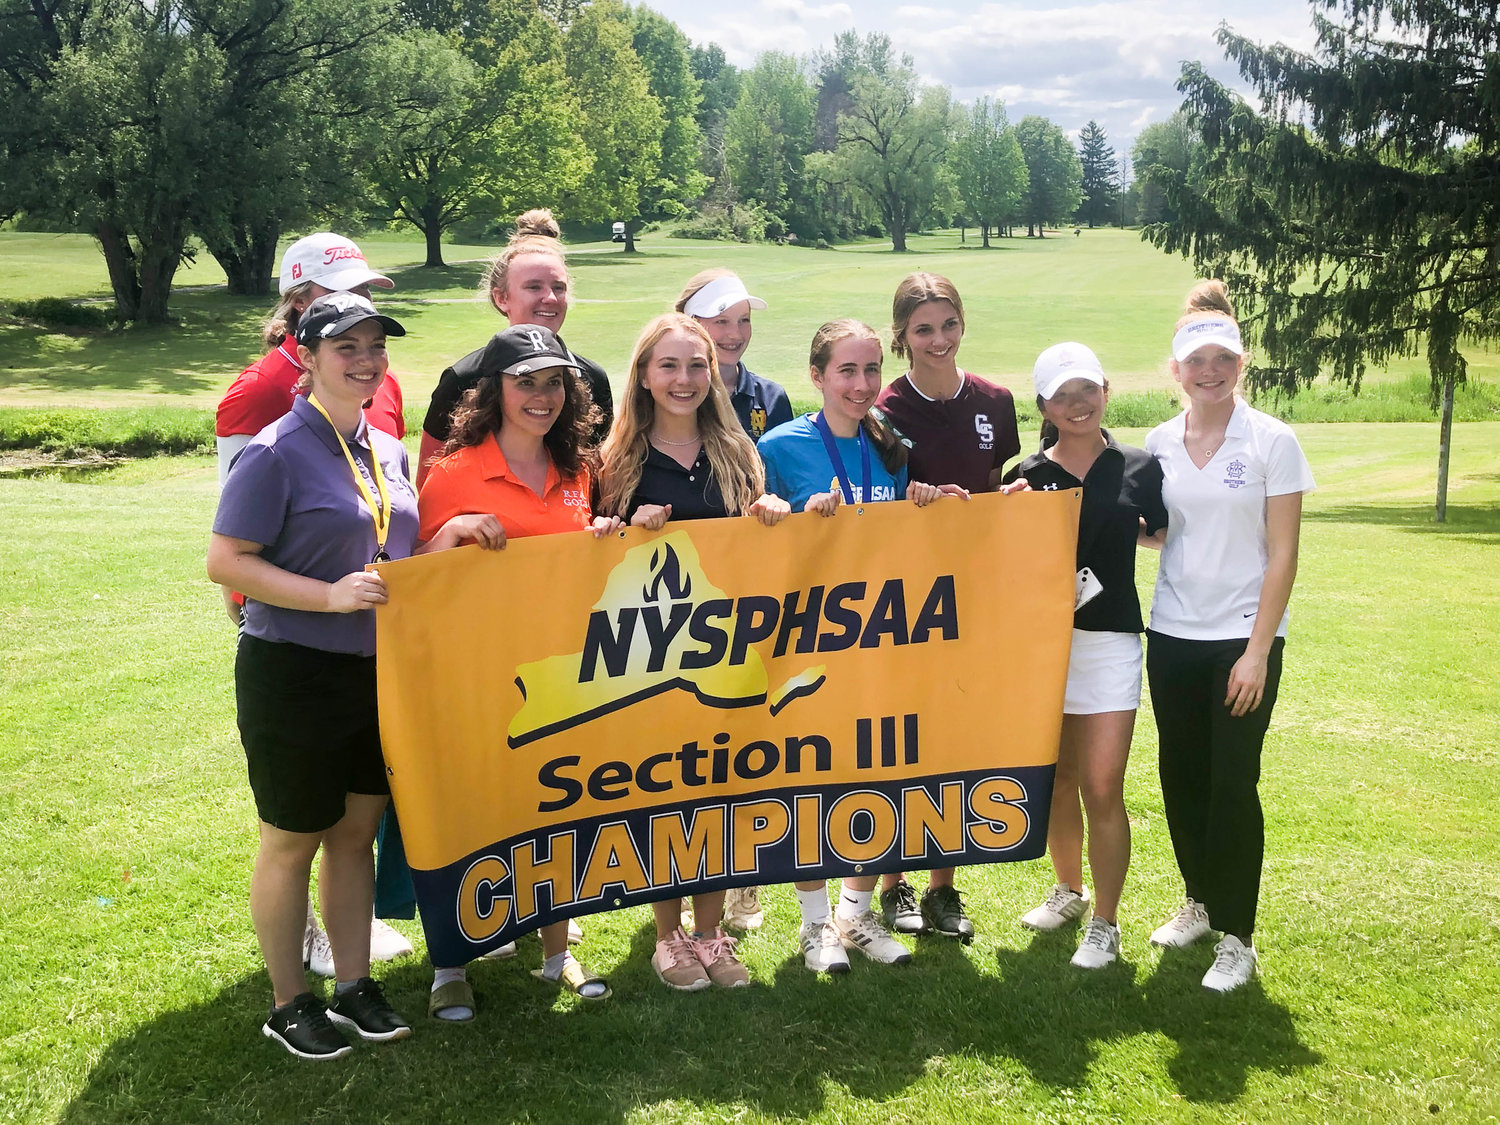 Nine golfers qualified for the state tournament for their performances at the Section III girls golf tournament at Kanon Valley Tuesday. They are: Watertown's Jillian Draper, RFA's Evie Denton,  Utica-Notre Dame's Sara Papale and Kamryn Yerman, New Hartford's Julia Sassower, Cicero North Syracuse's Jessica Ricciardi, Catherine Dadey of Westhill, Emily Barnes of Central Square and Hana Kang of Christian Brothers Academy.